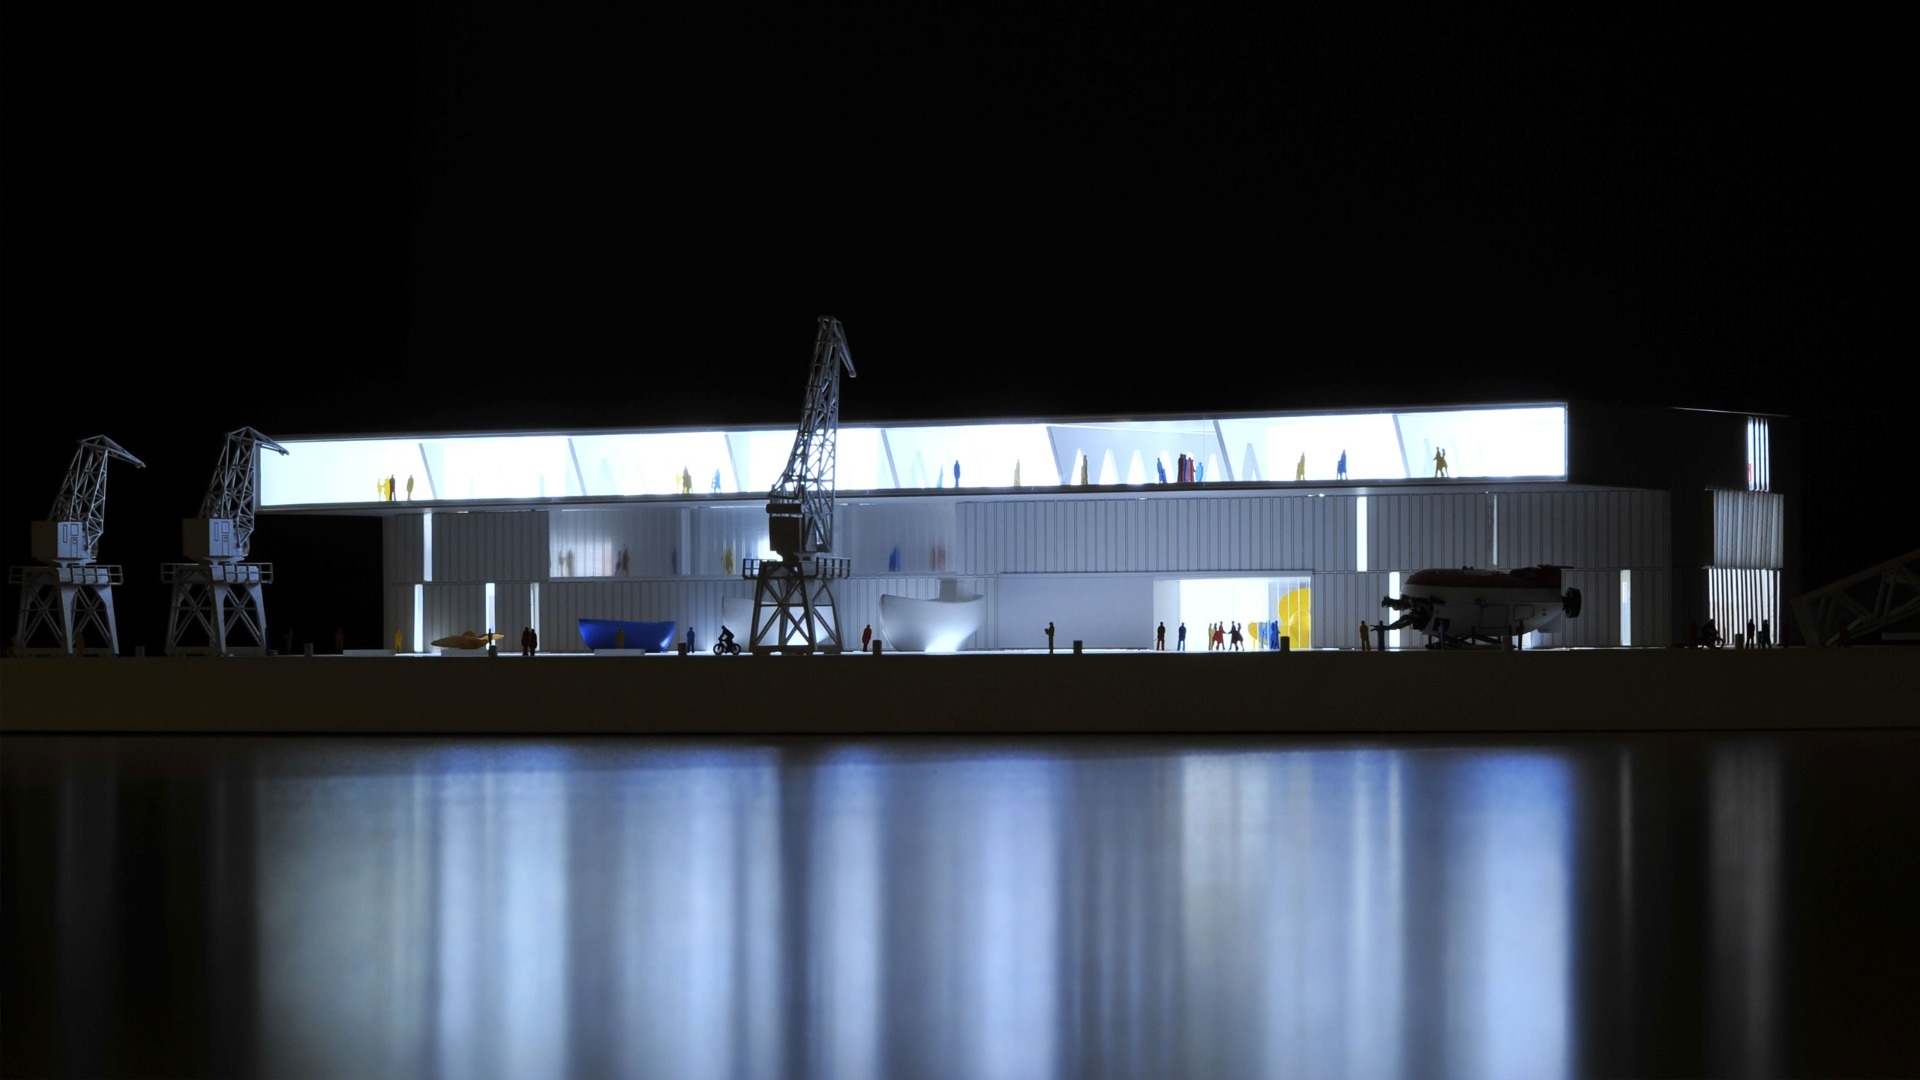 Competition for the Szczecin Maritime Museum